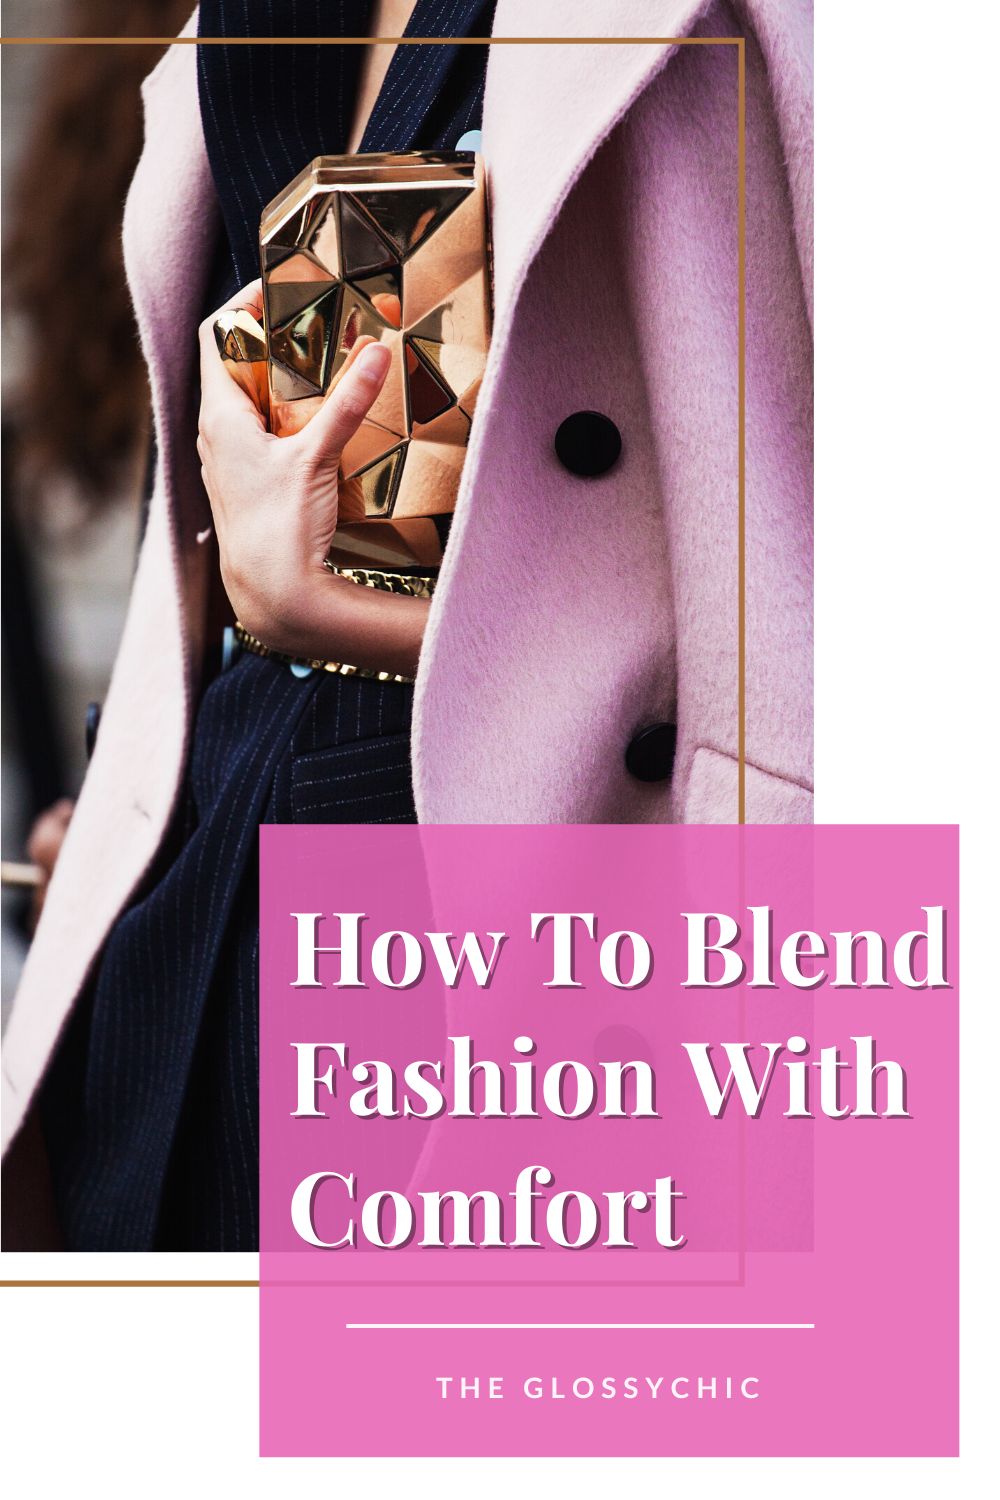 How To Blend Fashion With Comfort